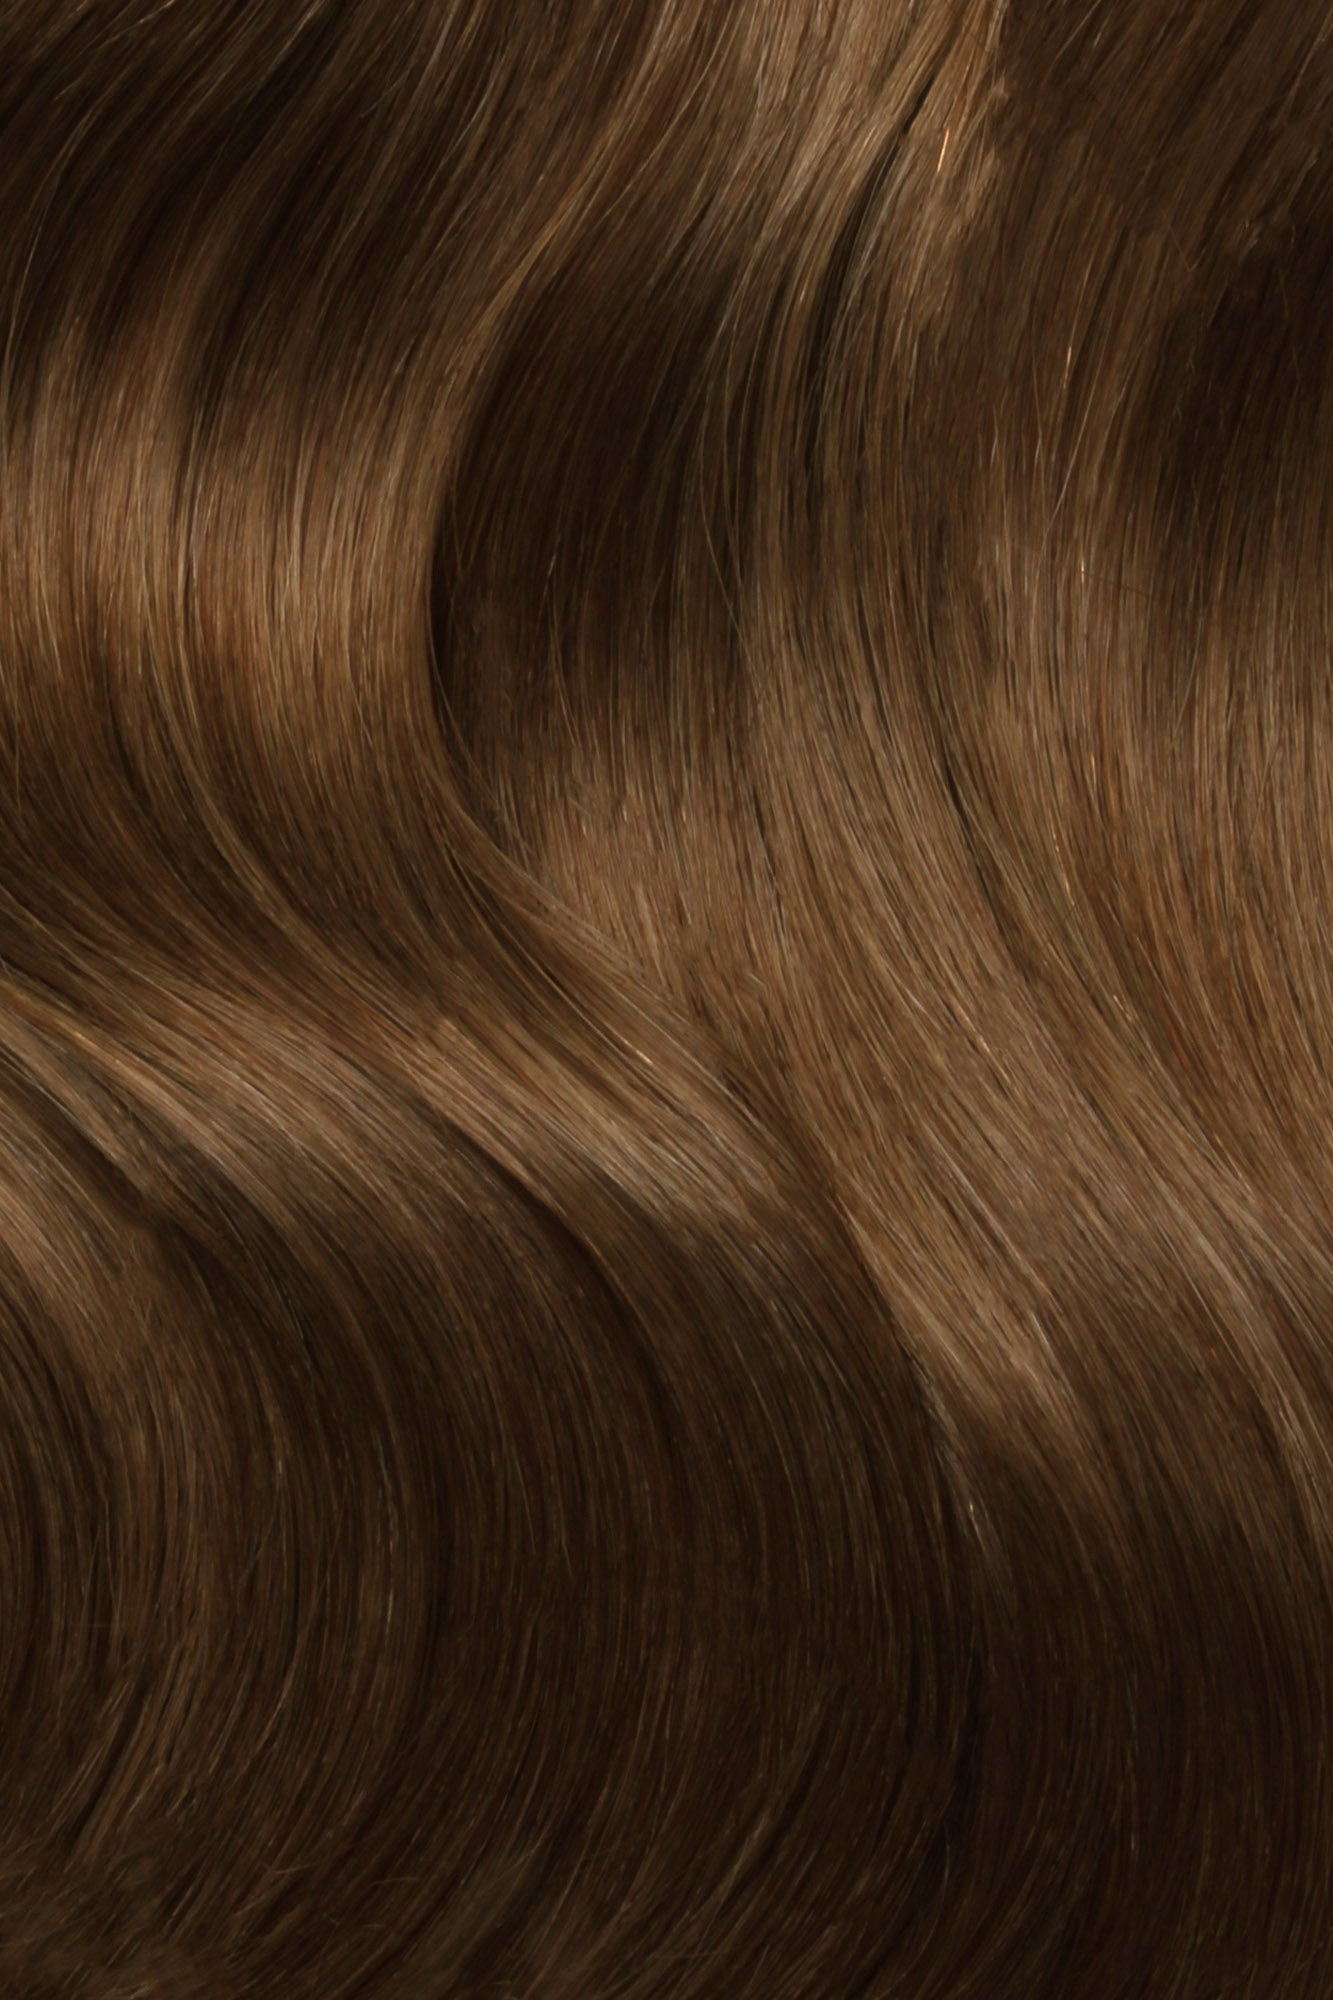 Nano Bonds 24 Inches - SWAY Hair Extensions Chestnut-Brown-4 Ultra-fine, invisible bonds for a flawless, natural look. 100% Remy Human hair, lightweight and versatile. Reusable and perfect for individual or salon use.